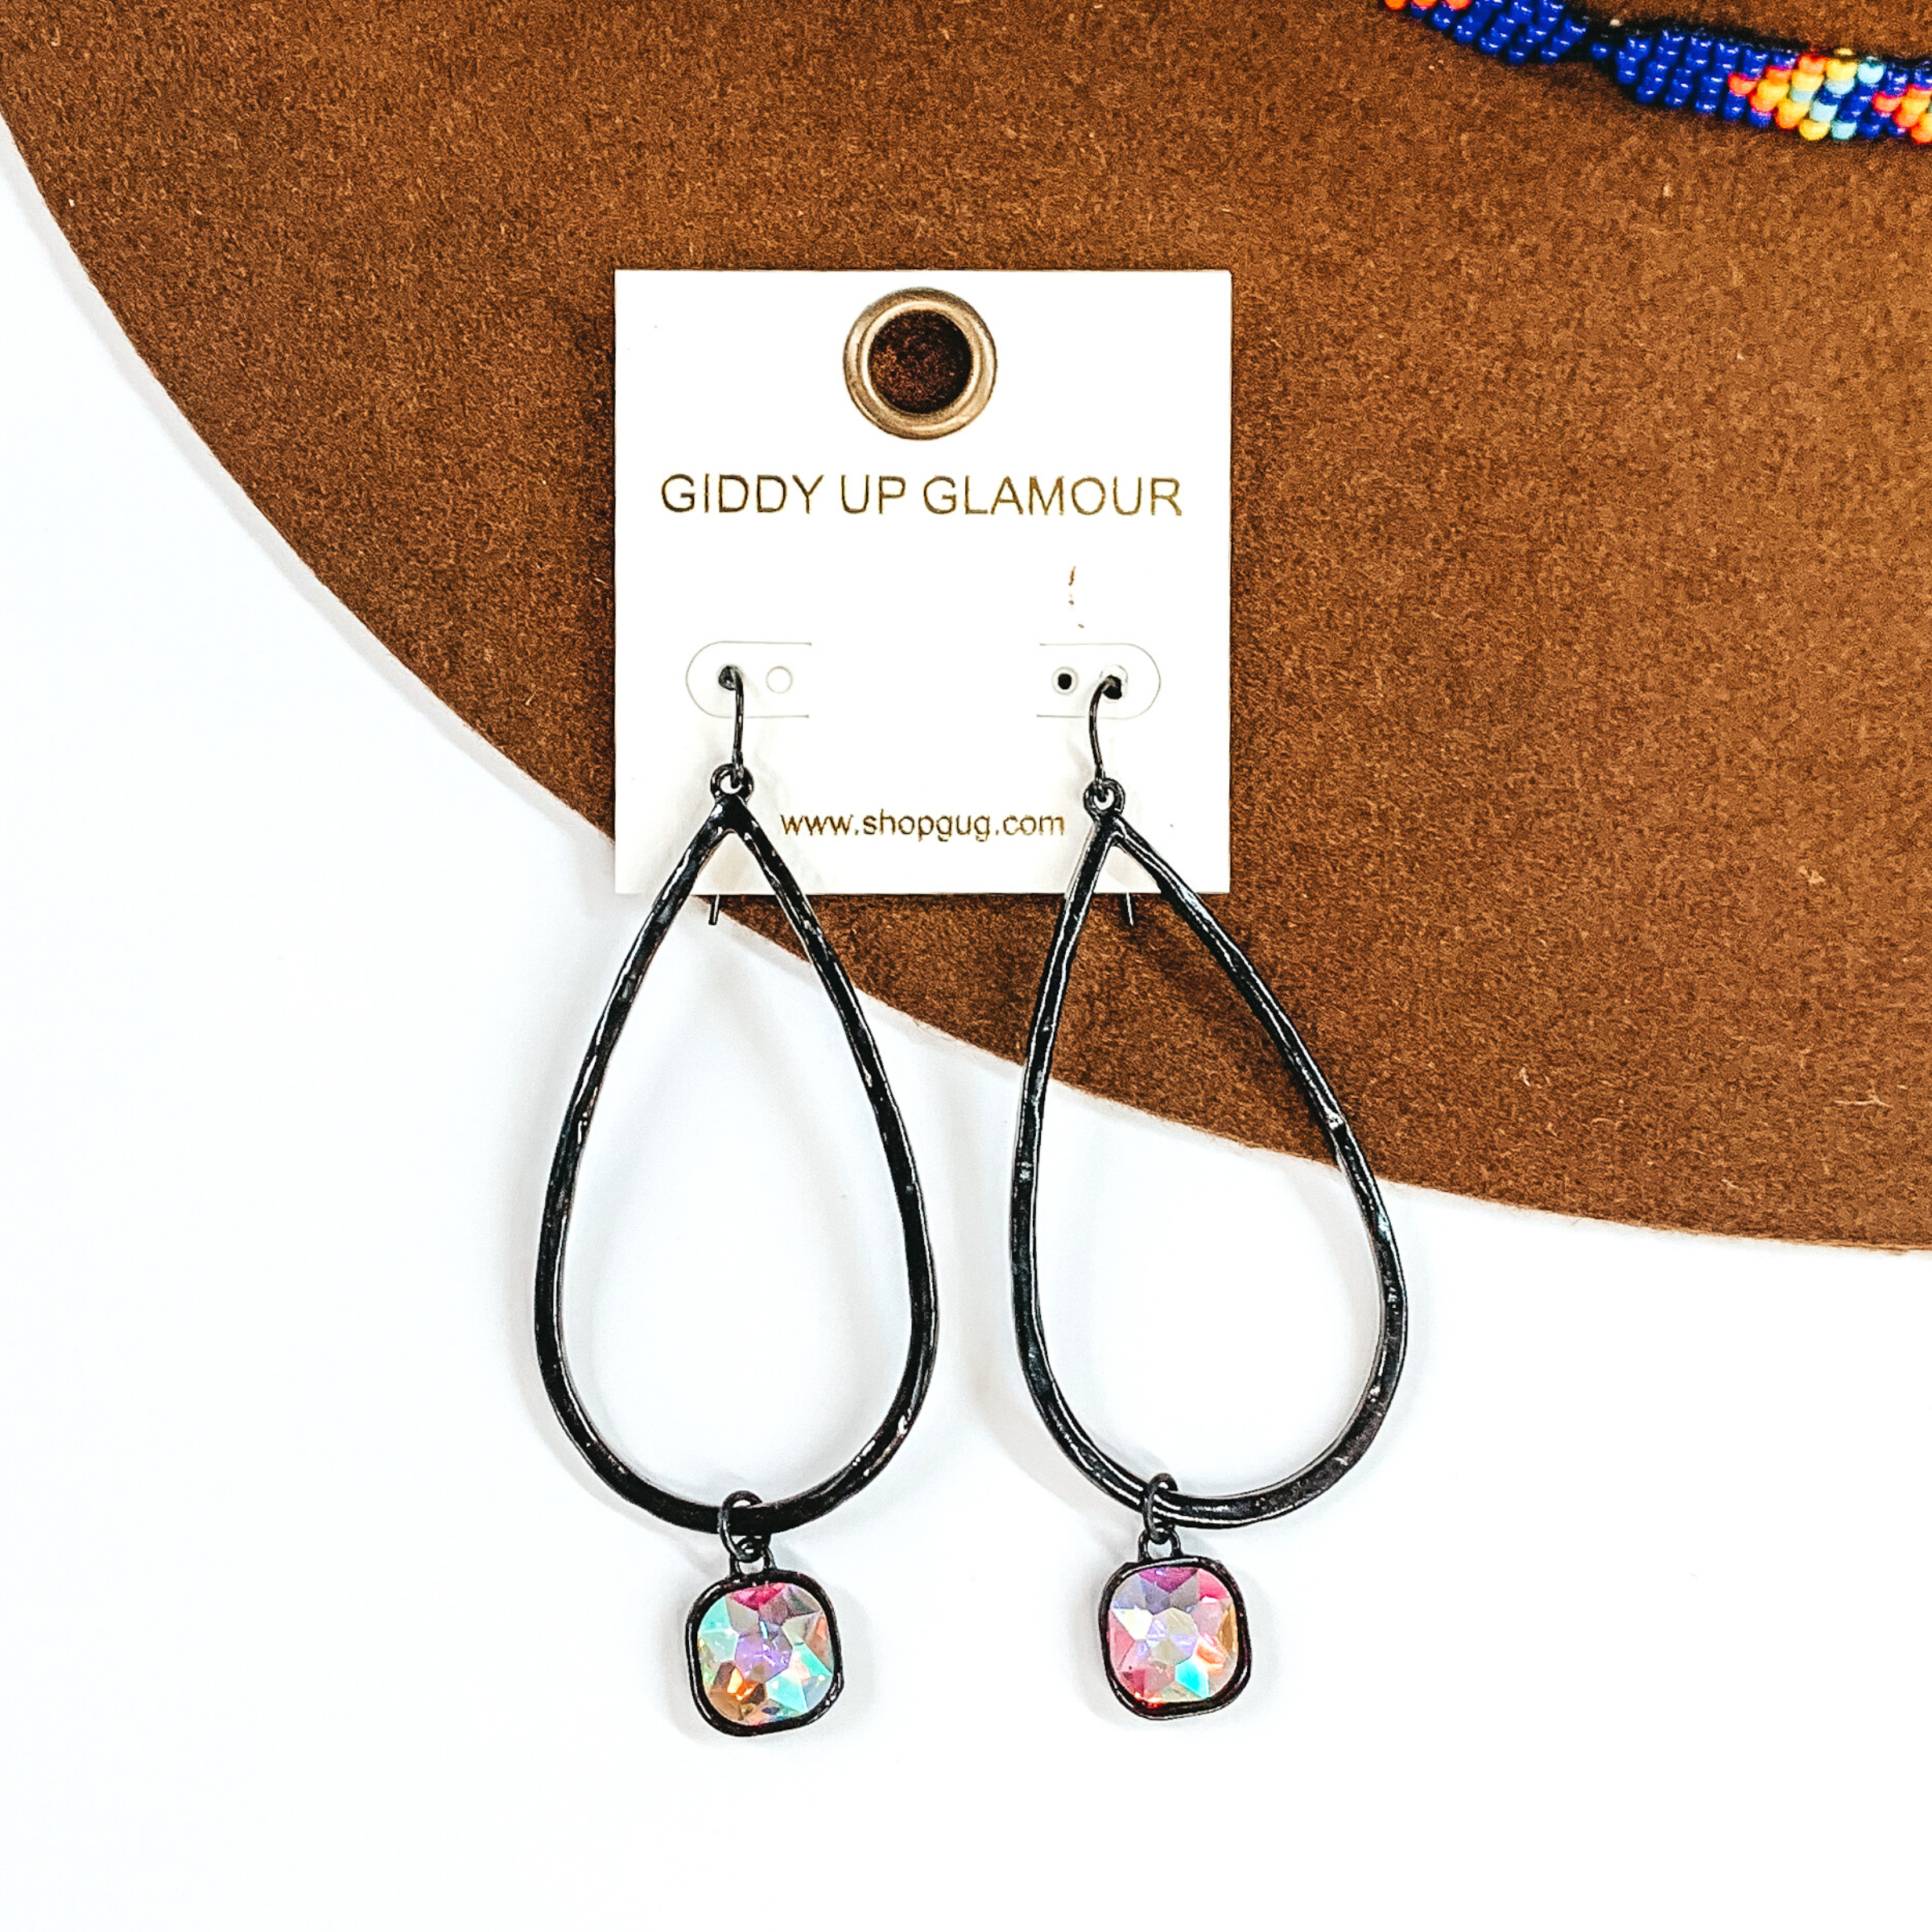 Black teardrop hammered earrings with a hanging cushion cut ab crystal. These earrings are pictured on a white and brown background.